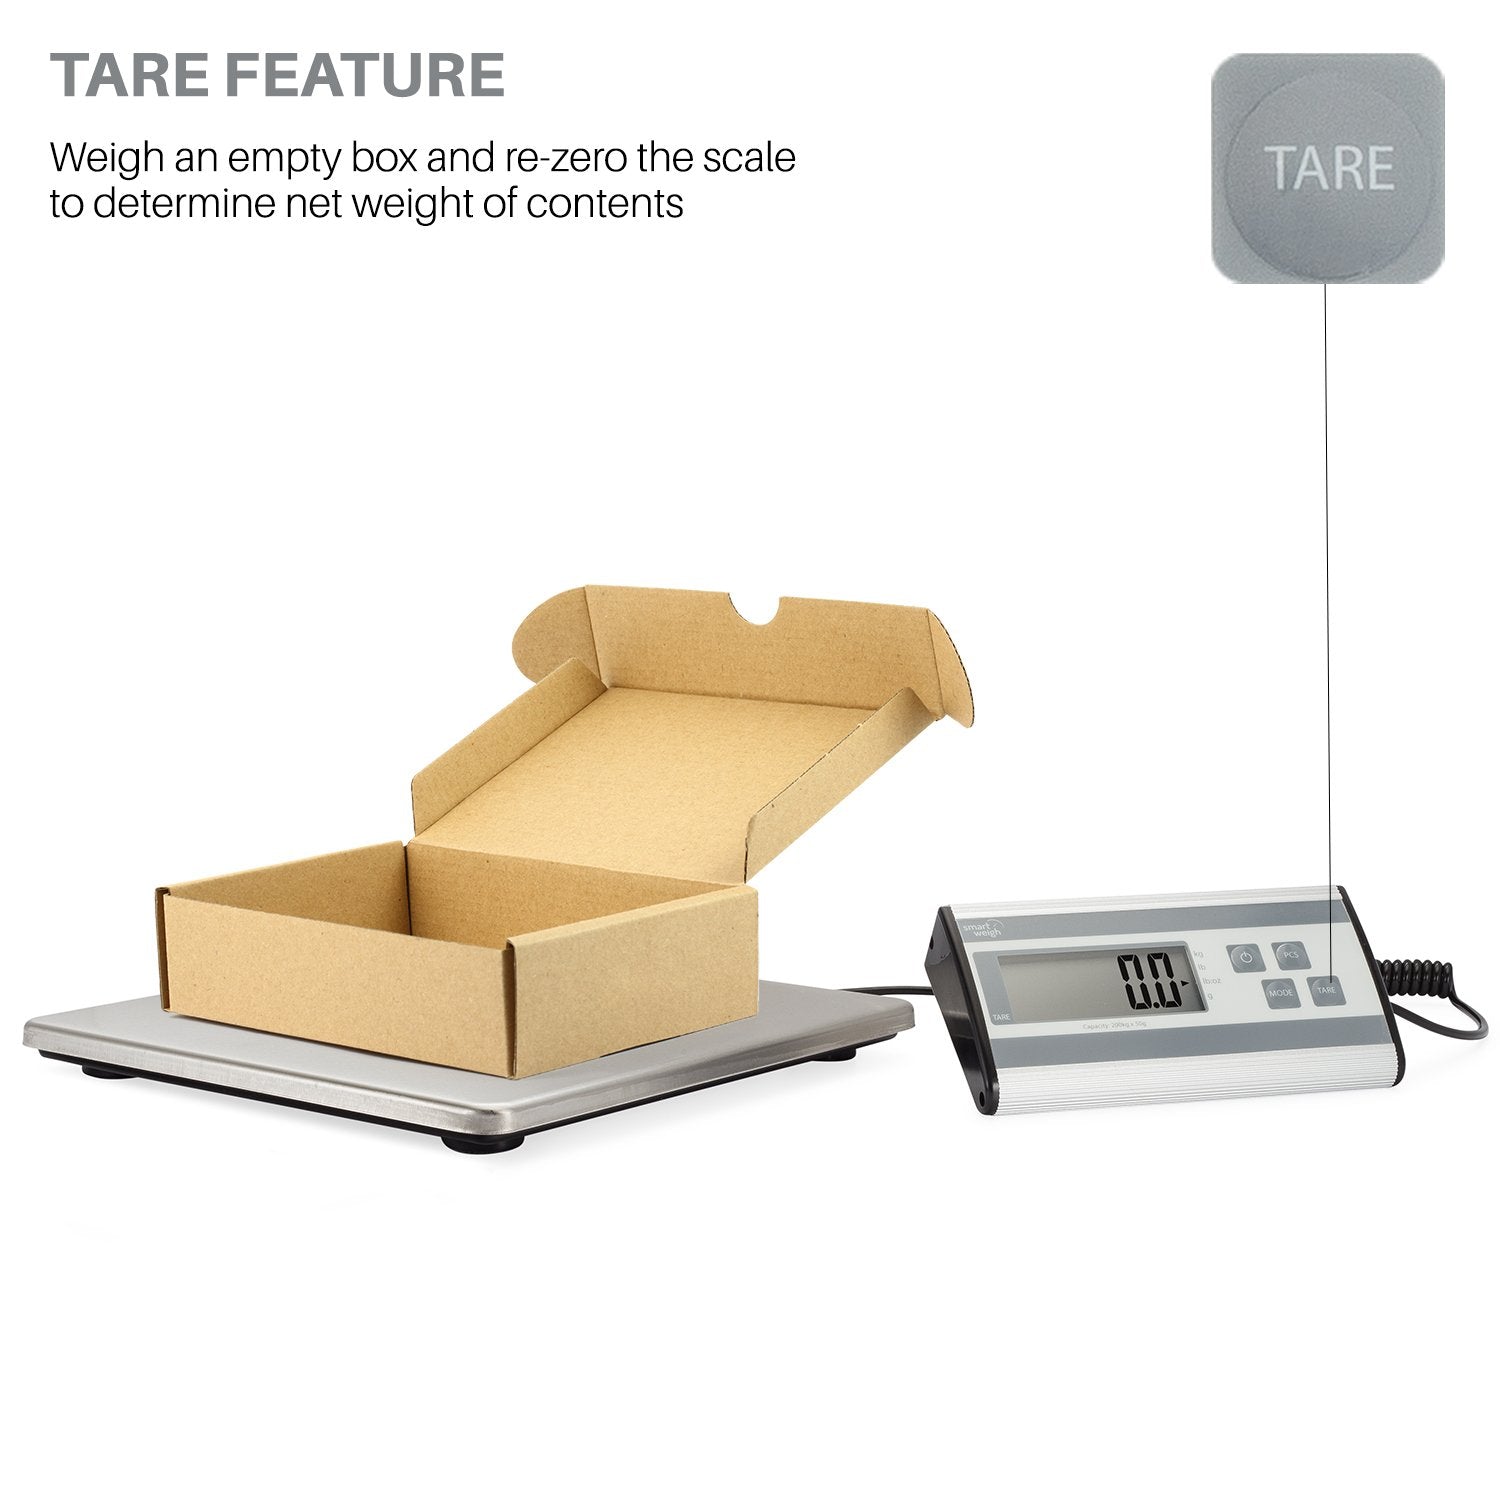 Smart Weigh 440lbs x 6 oz. Digital Heavy Duty Shipping and Postal Scale, with Durable Stainless Steel Large Platform, UPS USPS Post Office Postal Scale and Luggage Scale  - Like New